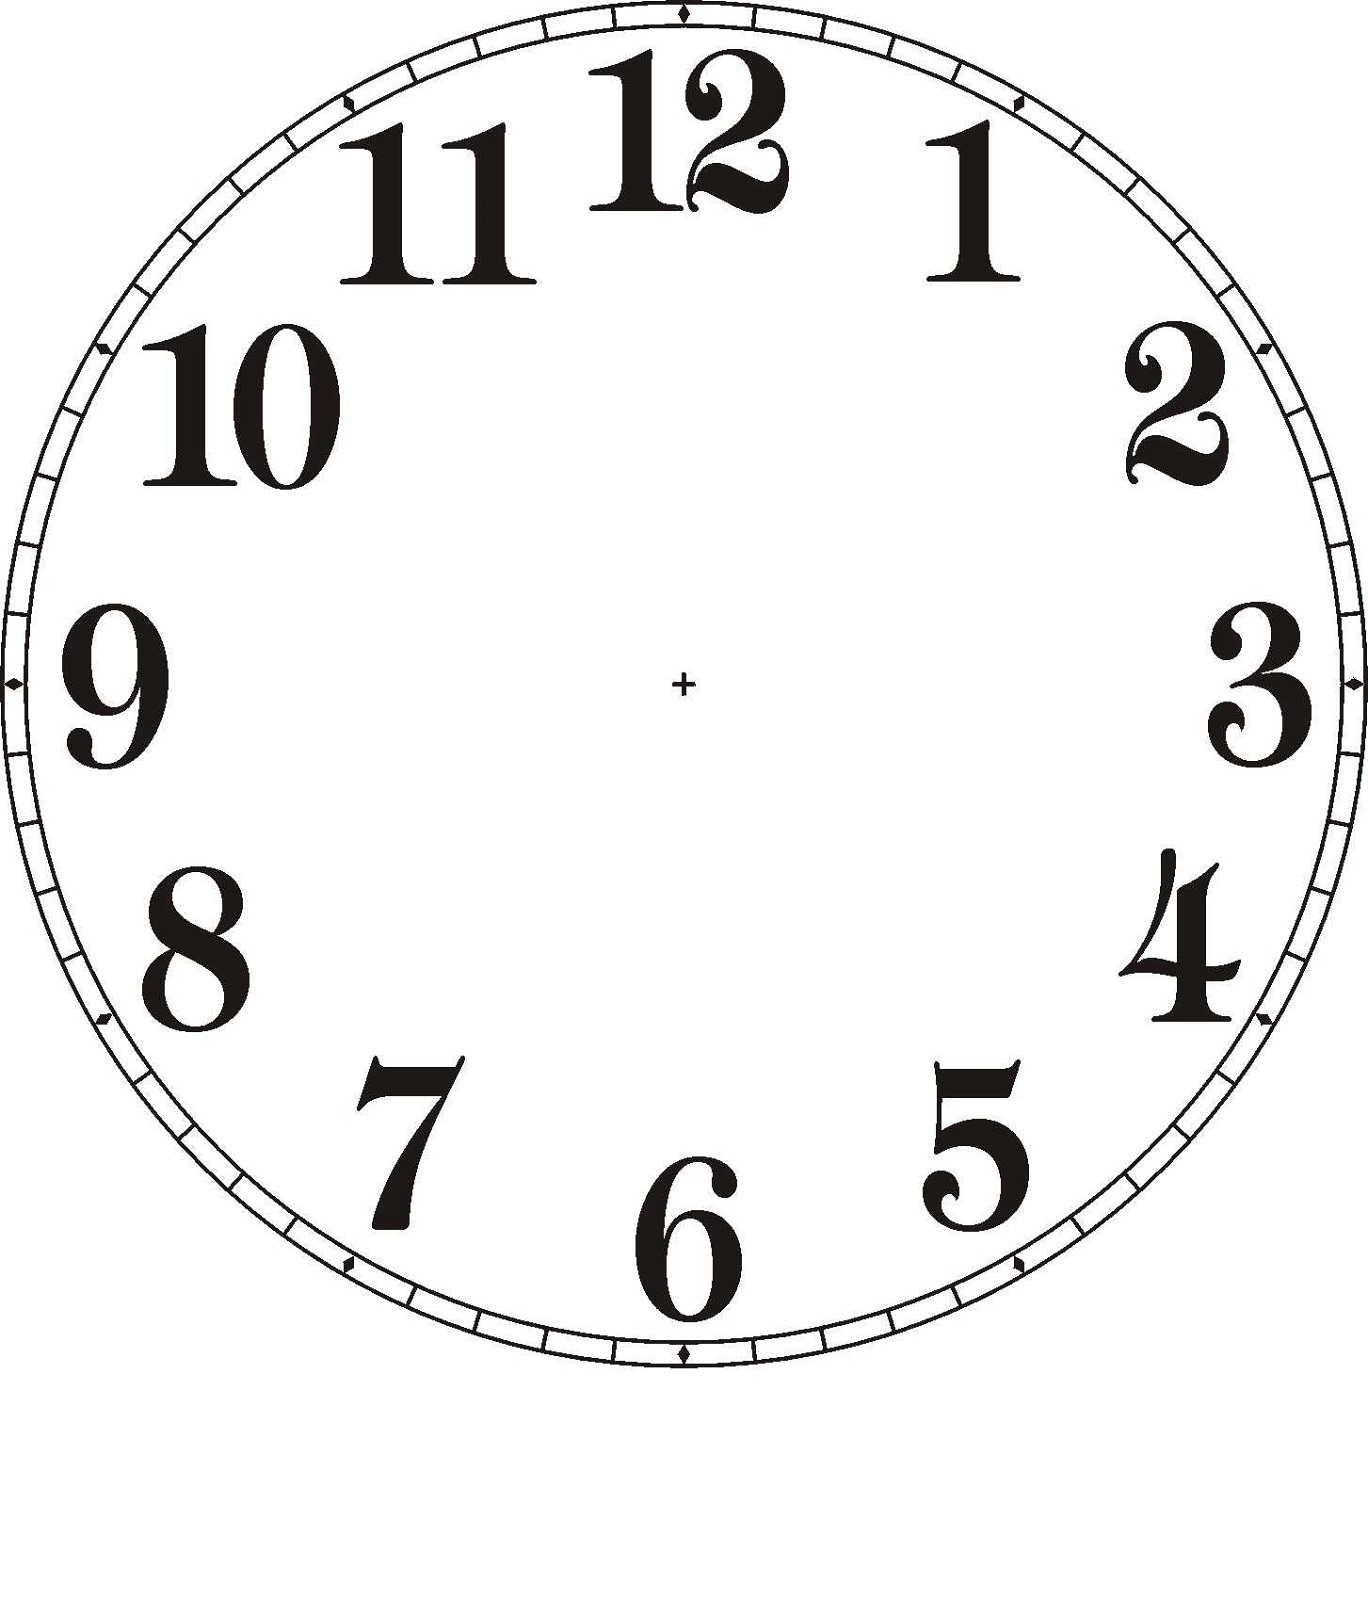 free-clock-faces-templates-activity-shelter